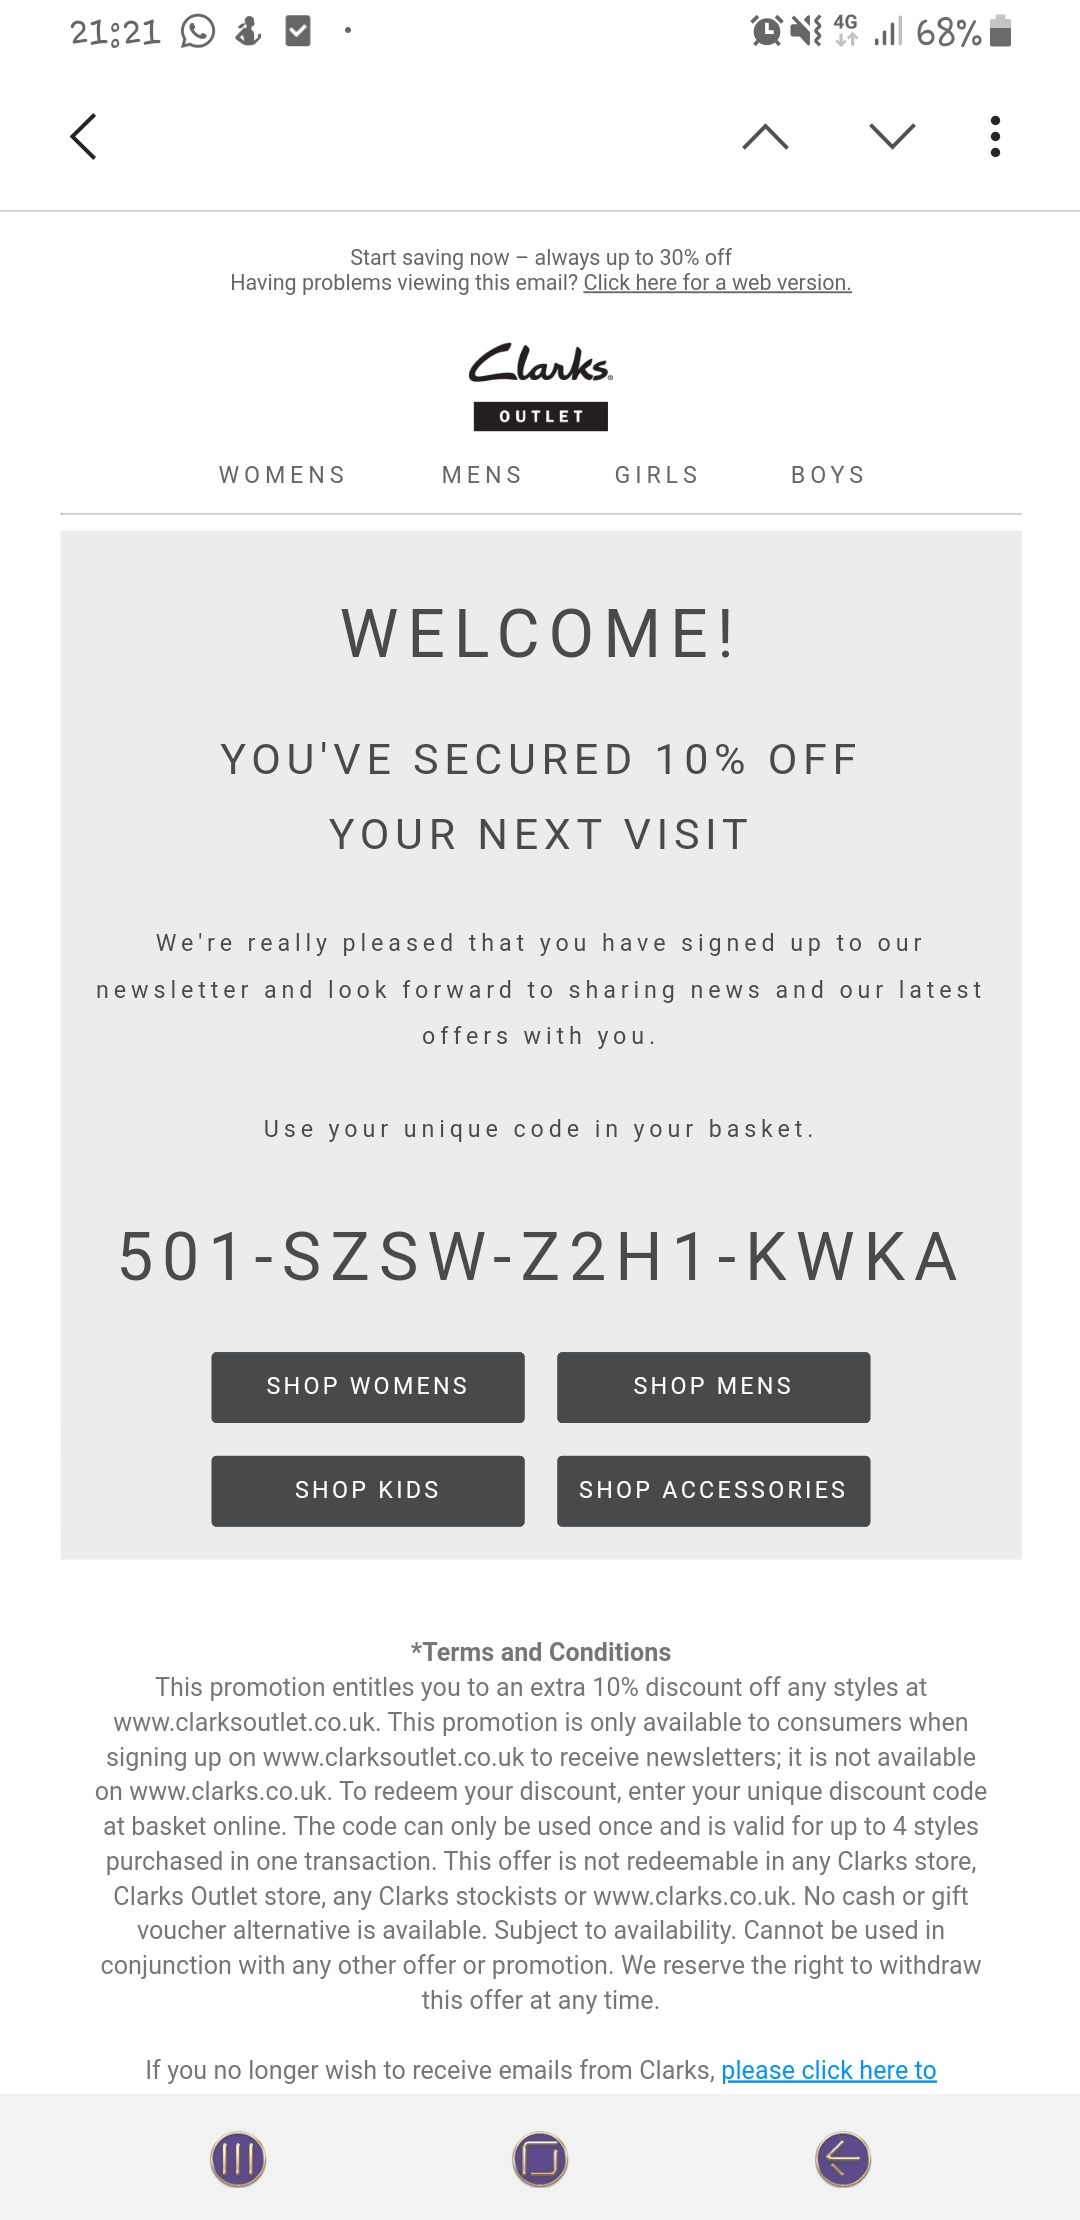 clarks outlet promo code 2019